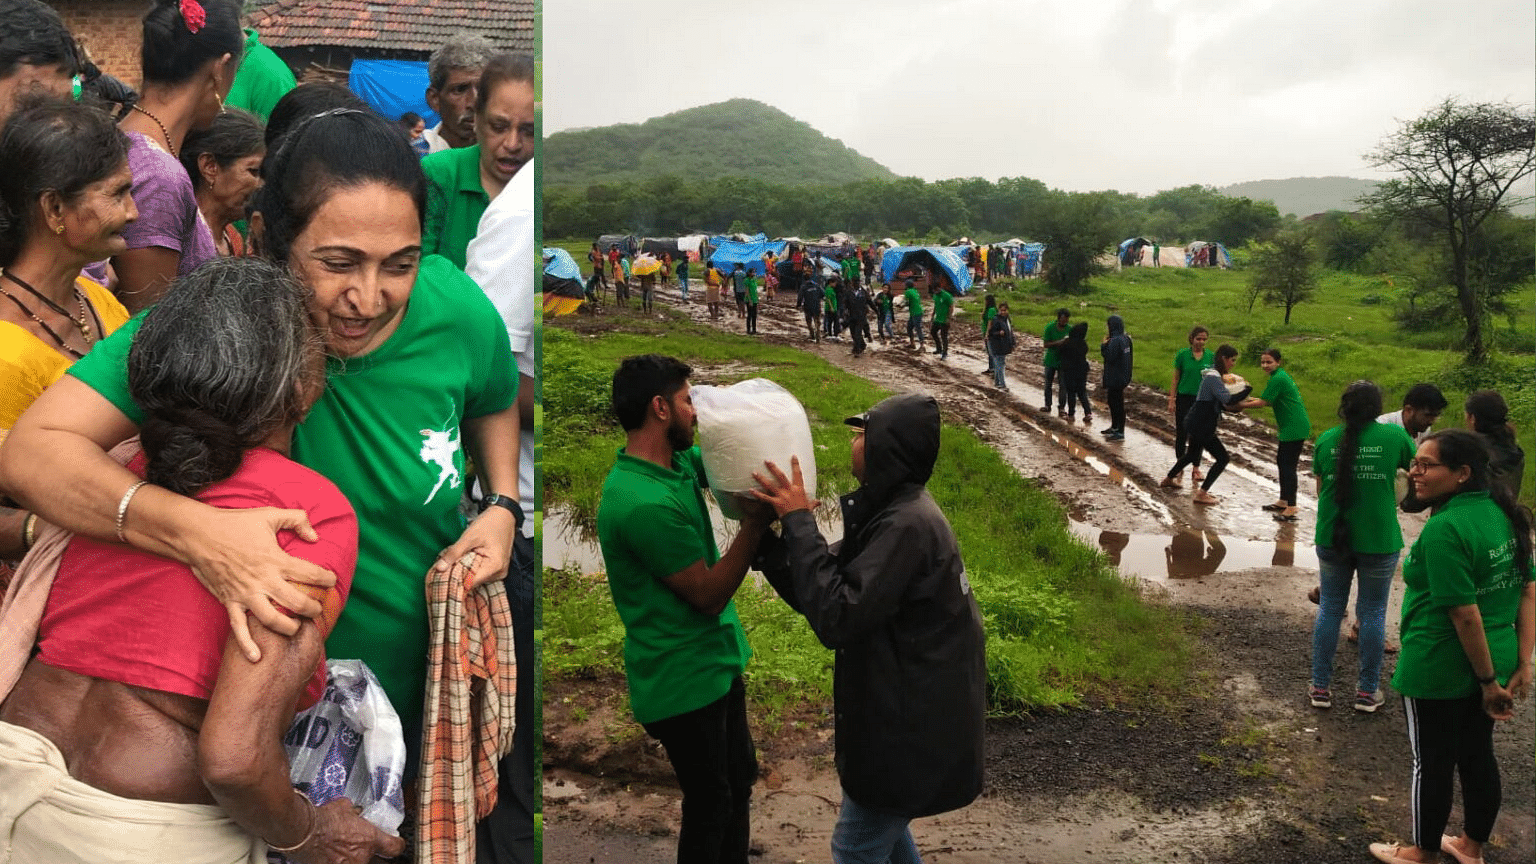 This Independence Day, 40,000 volunteers of Robin Hood Army are feeding 5 million people in villages across India.